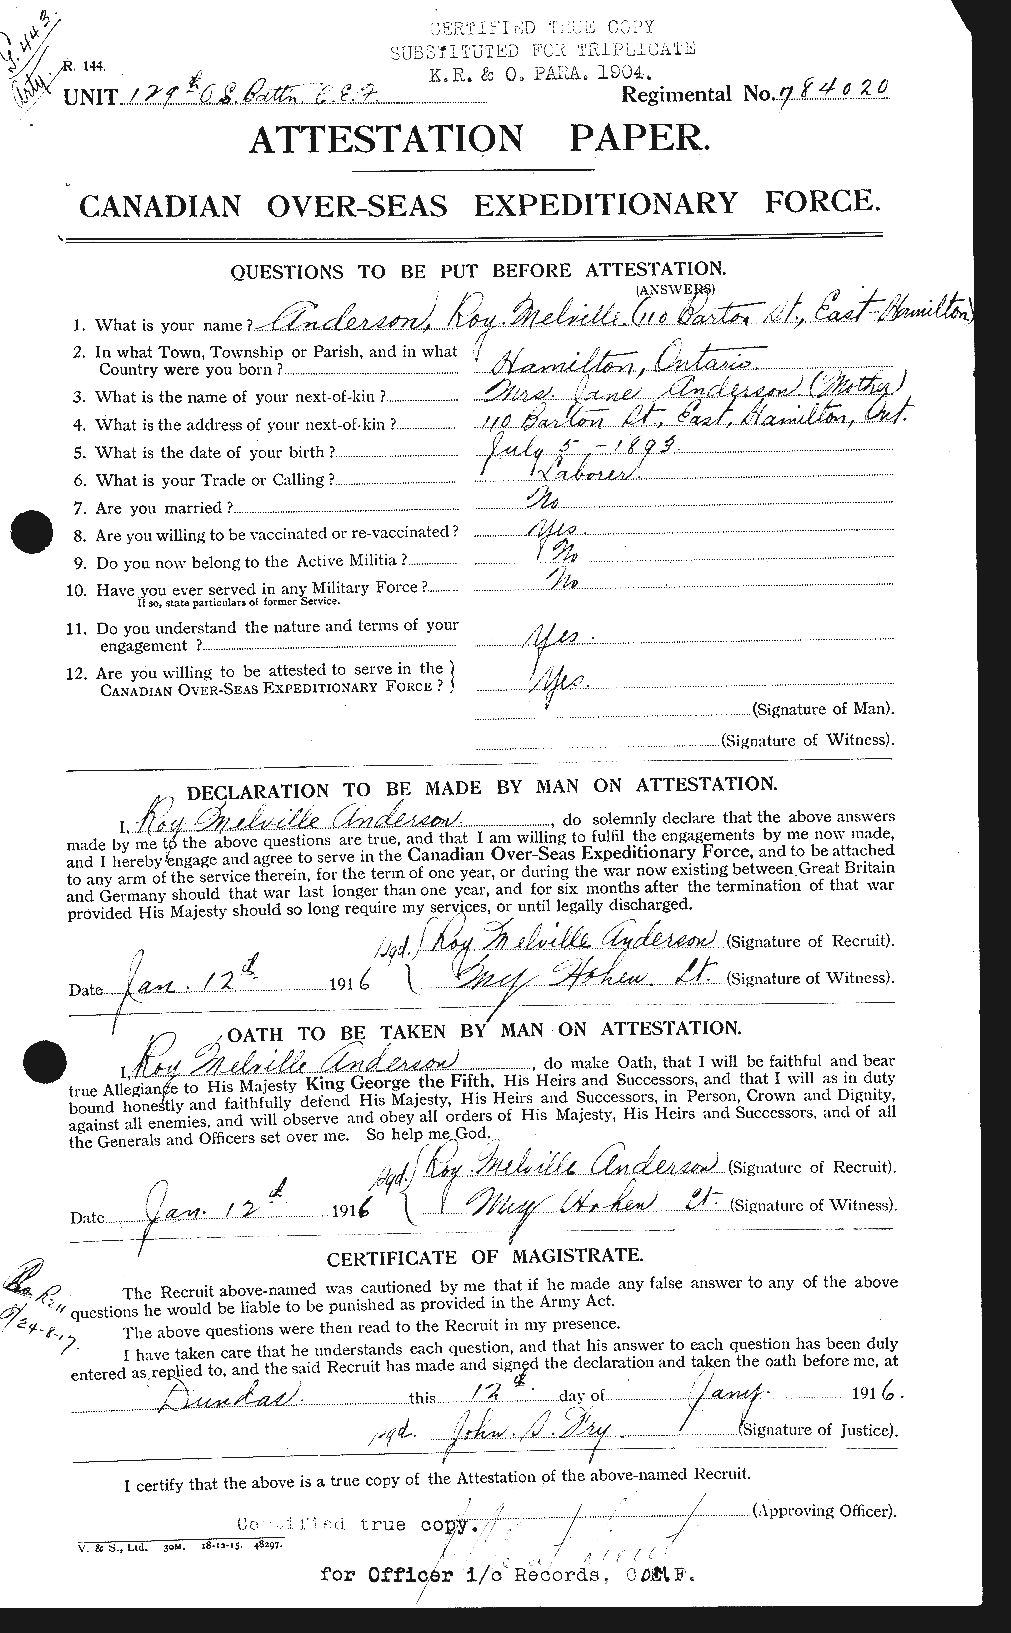 Personnel Records of the First World War - CEF 207193a